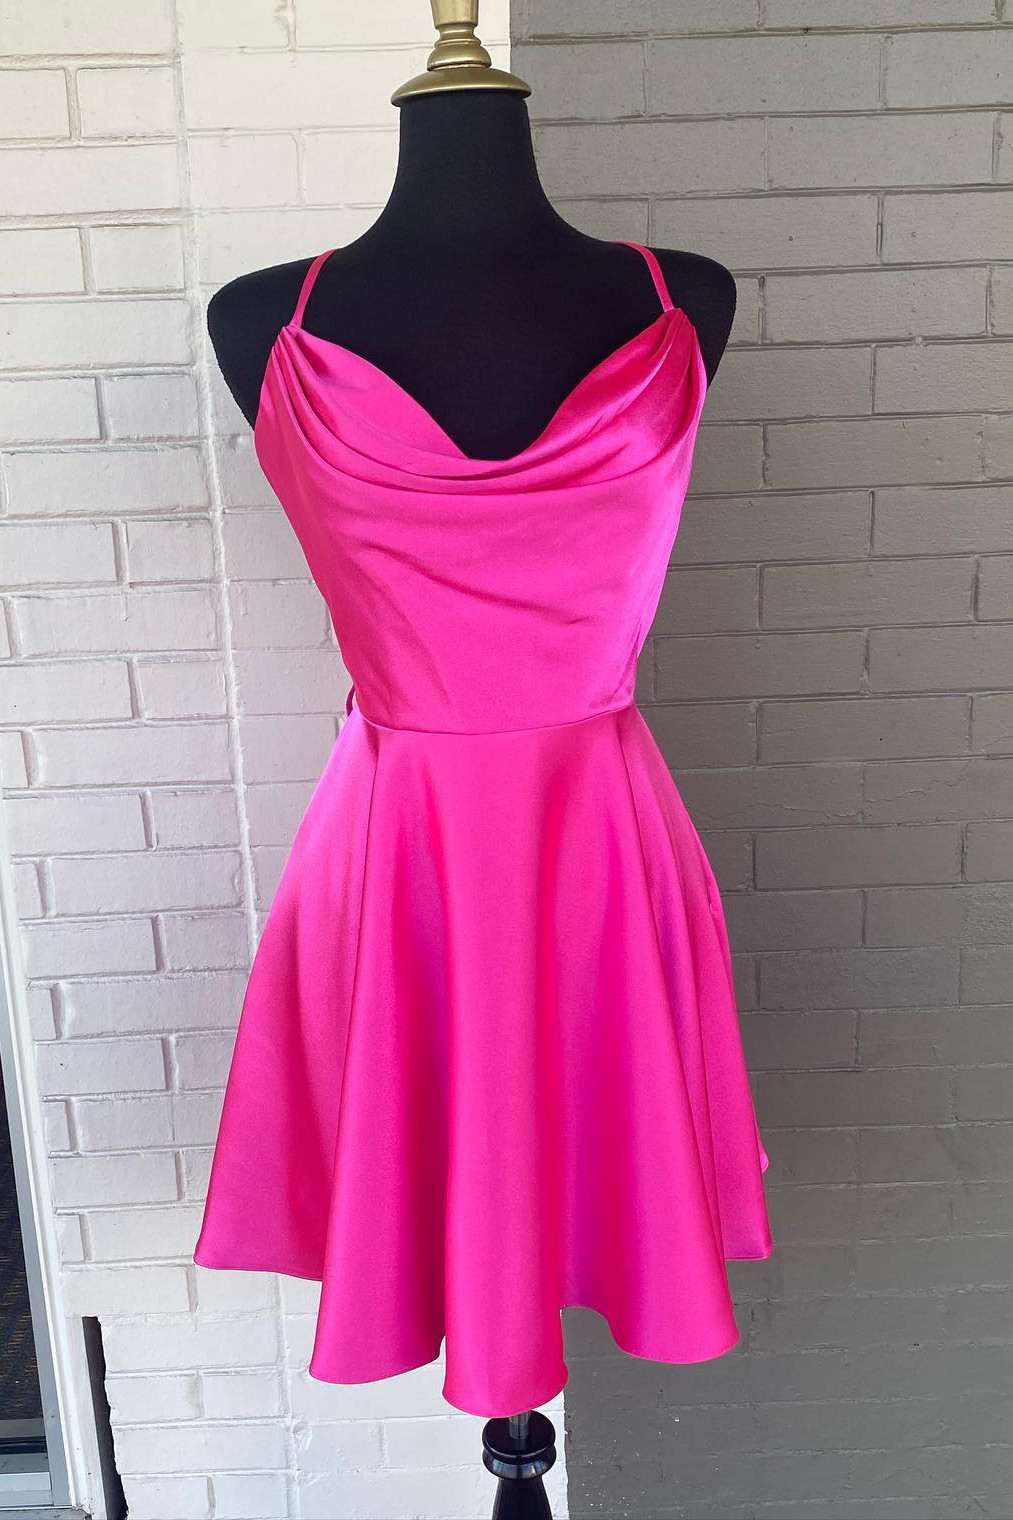 Neon Pink Lace-Up A-Line Satin Homecoming Dress,Night Dress Party Short